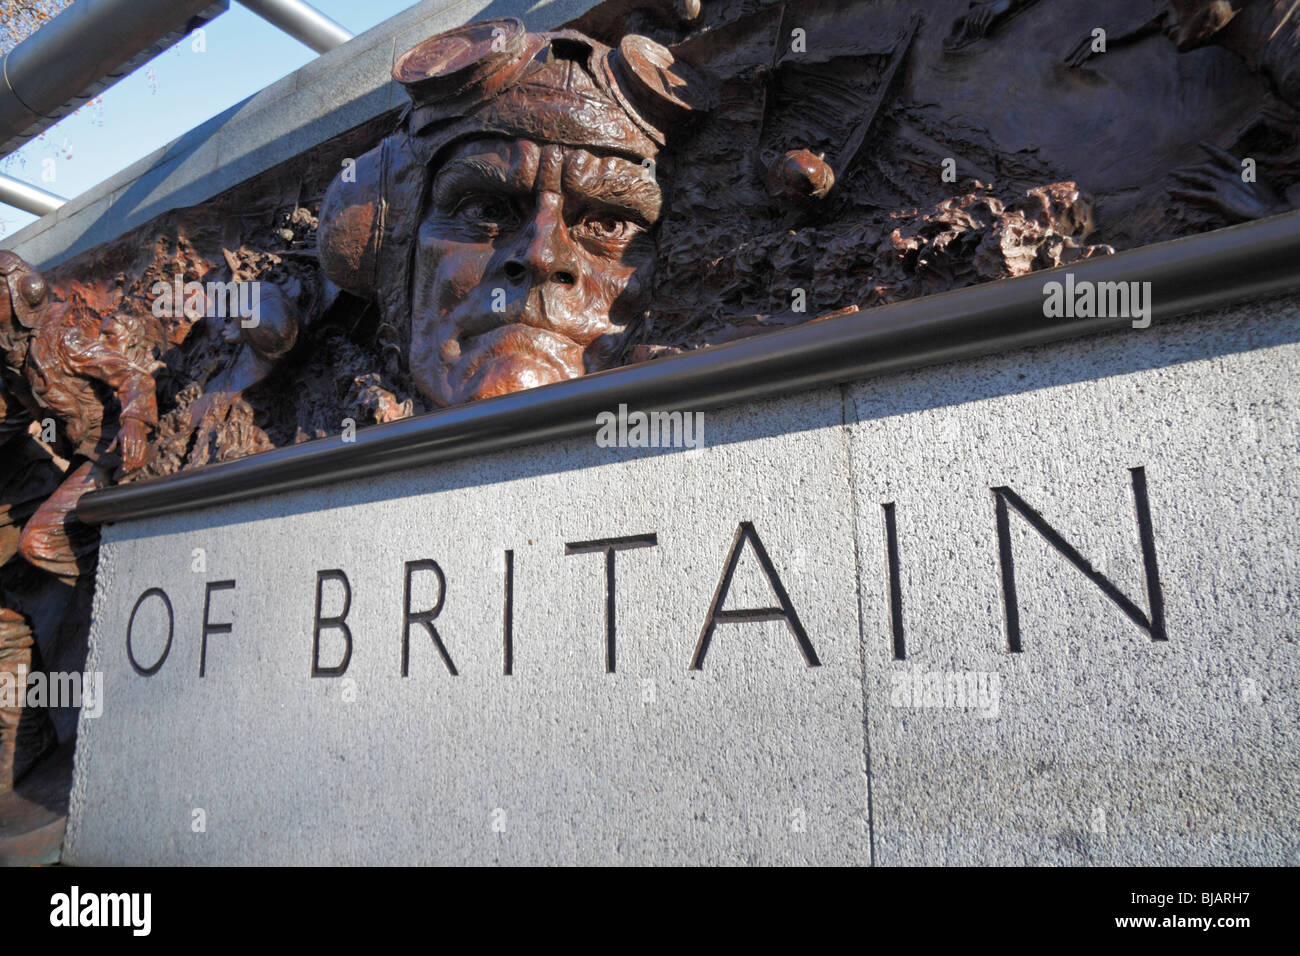 Close up view of  a figure in the Battle of Britain Memorial, on the banks of the River Thames, London, UK. Stock Photo